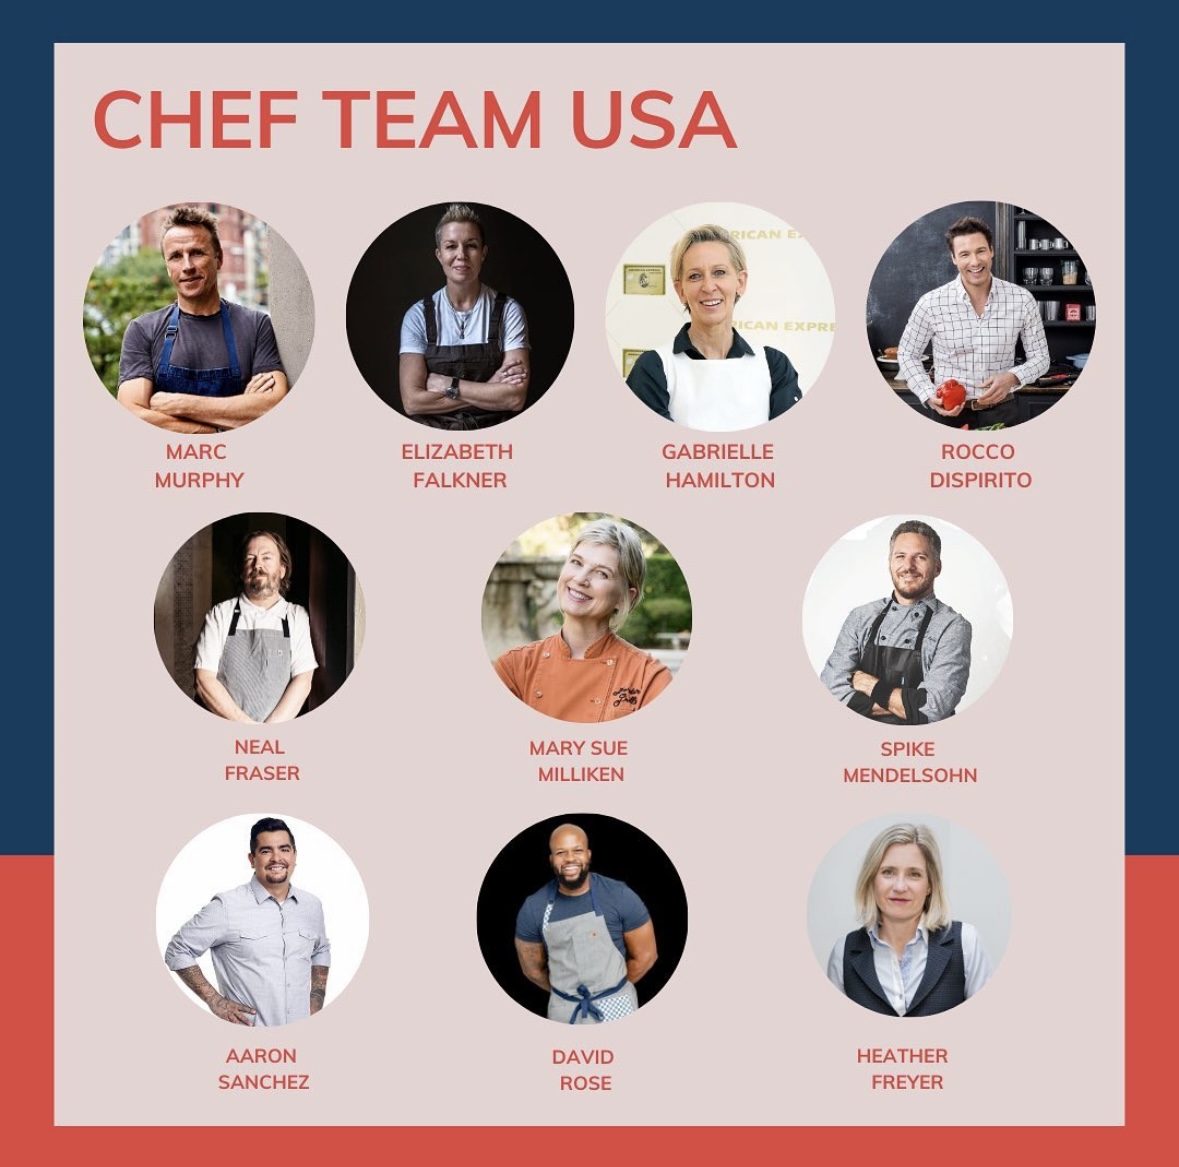 chefs faces on bike flyer